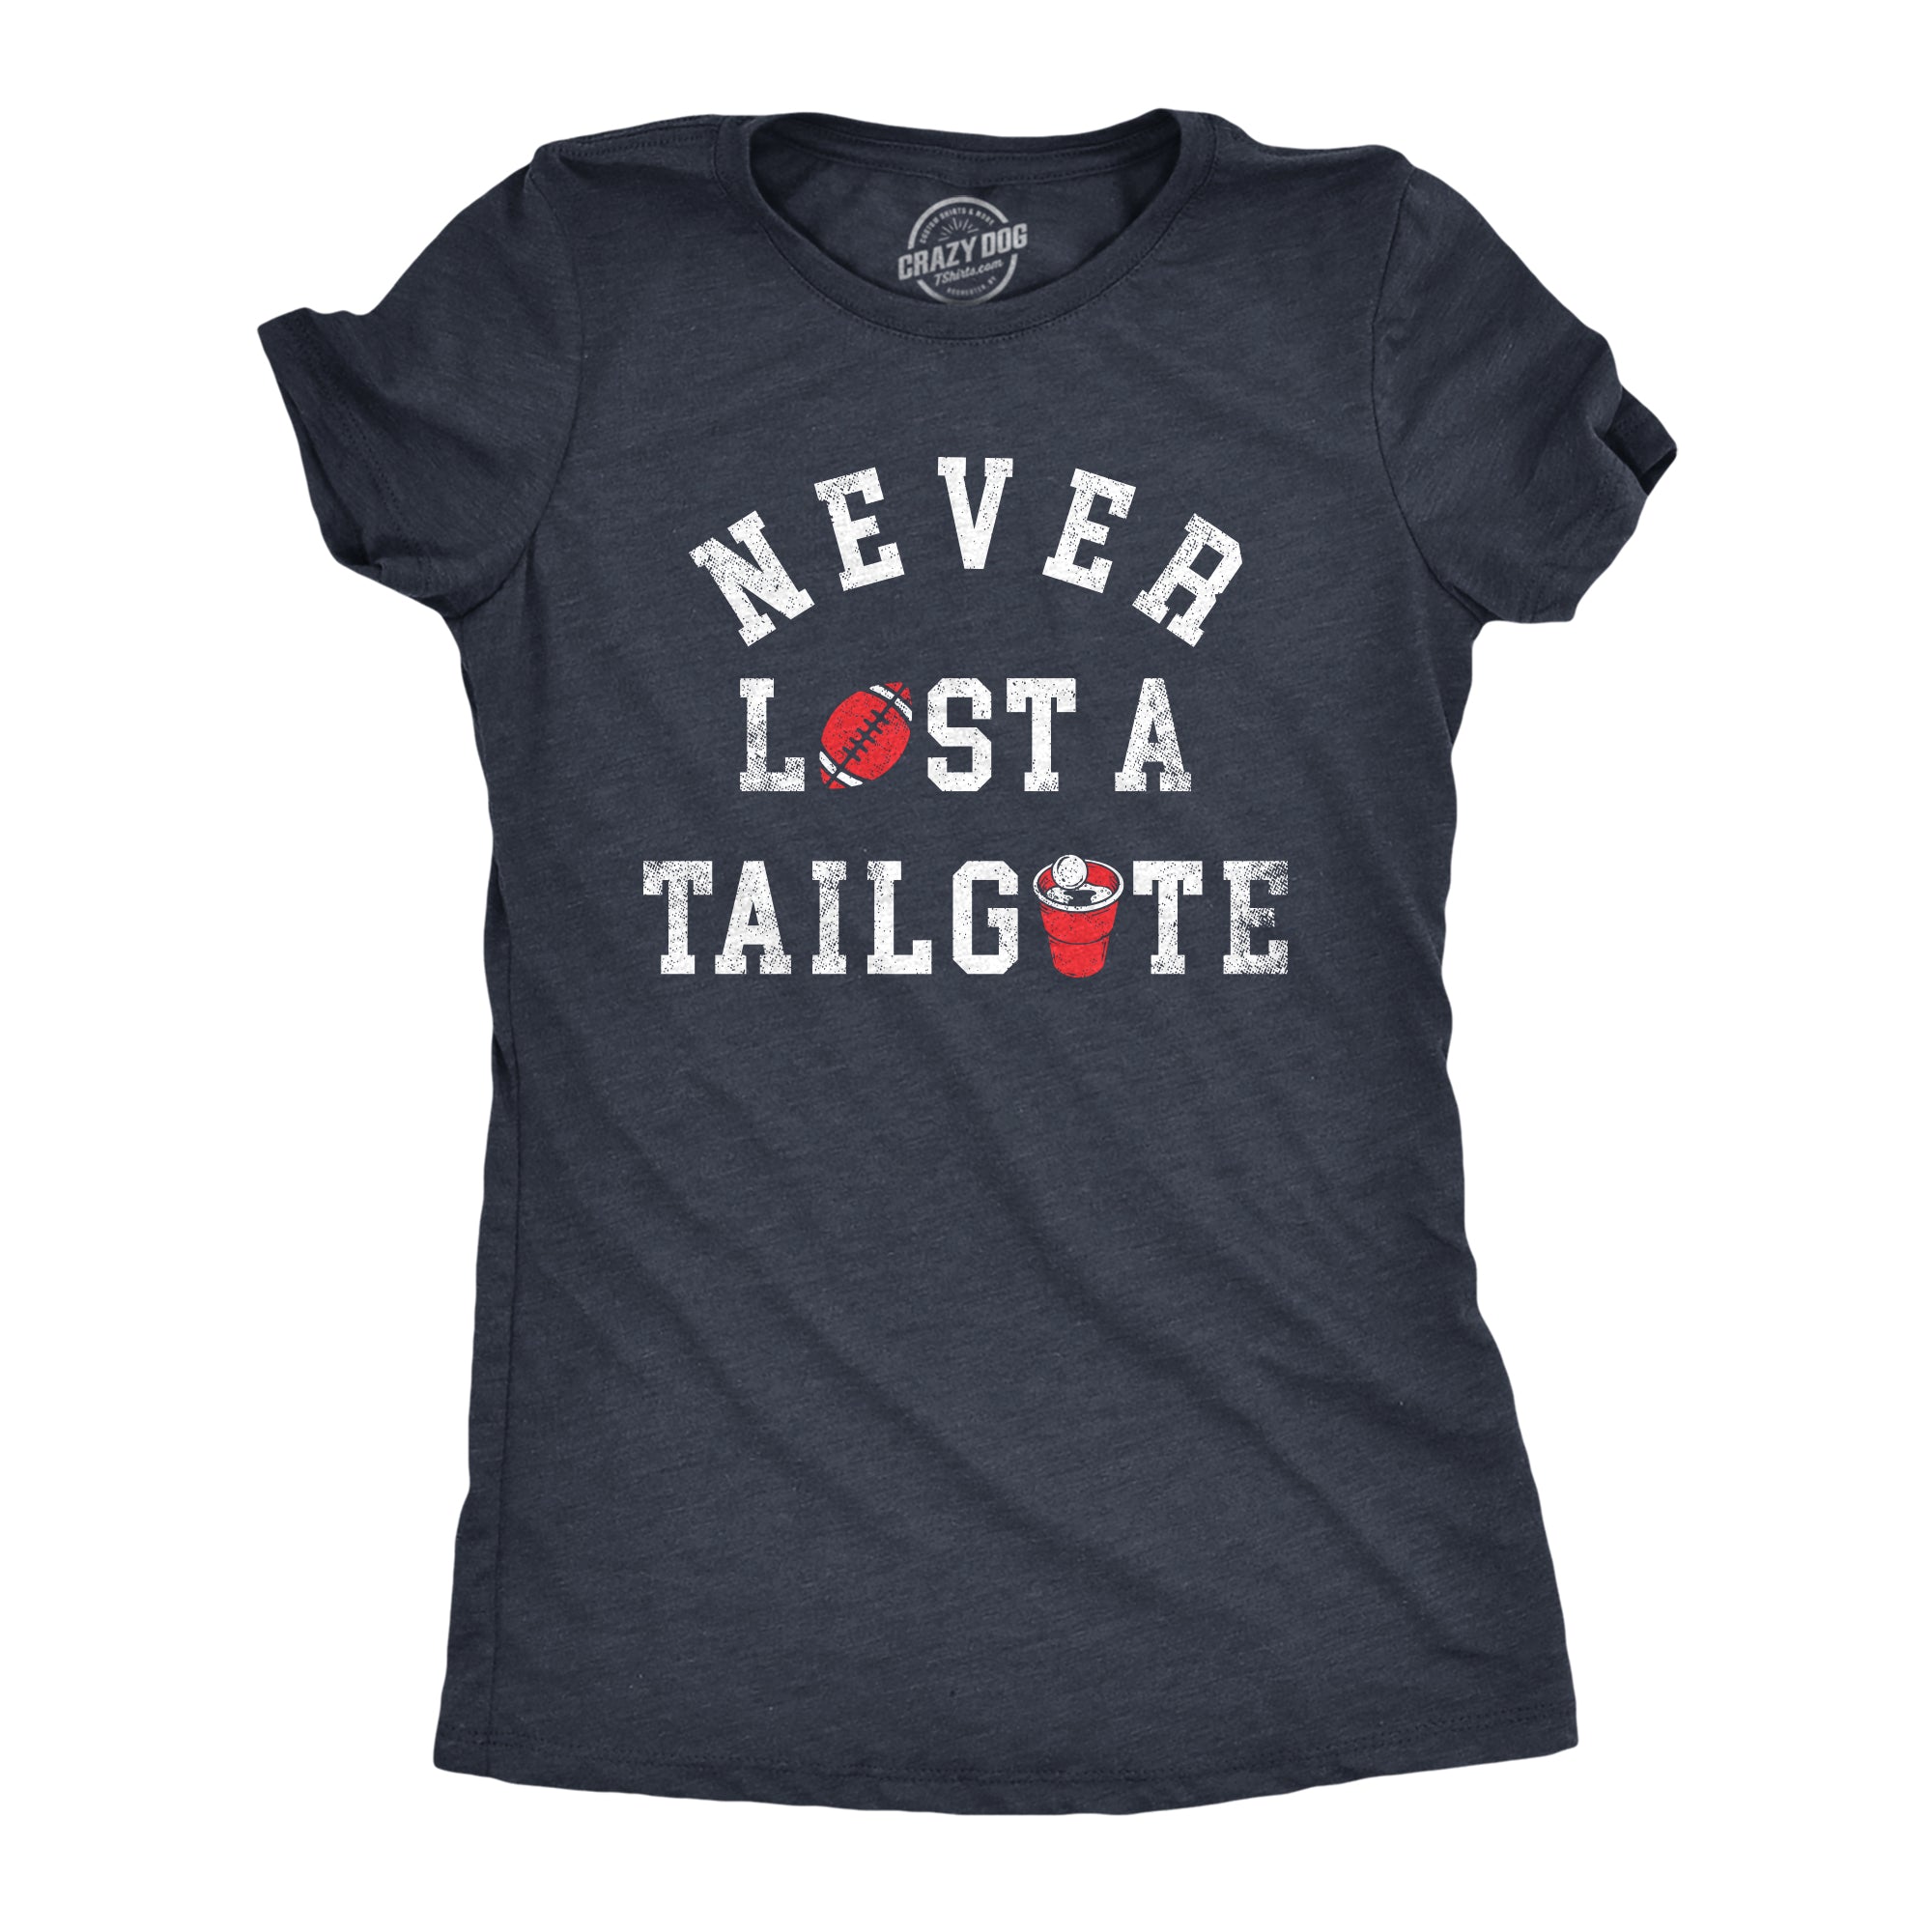 Funny Heather Navy - Never Lost A Tailgate Never Lost A Tailgate Womens T Shirt Nerdy Football Drinking sarcastic Tee